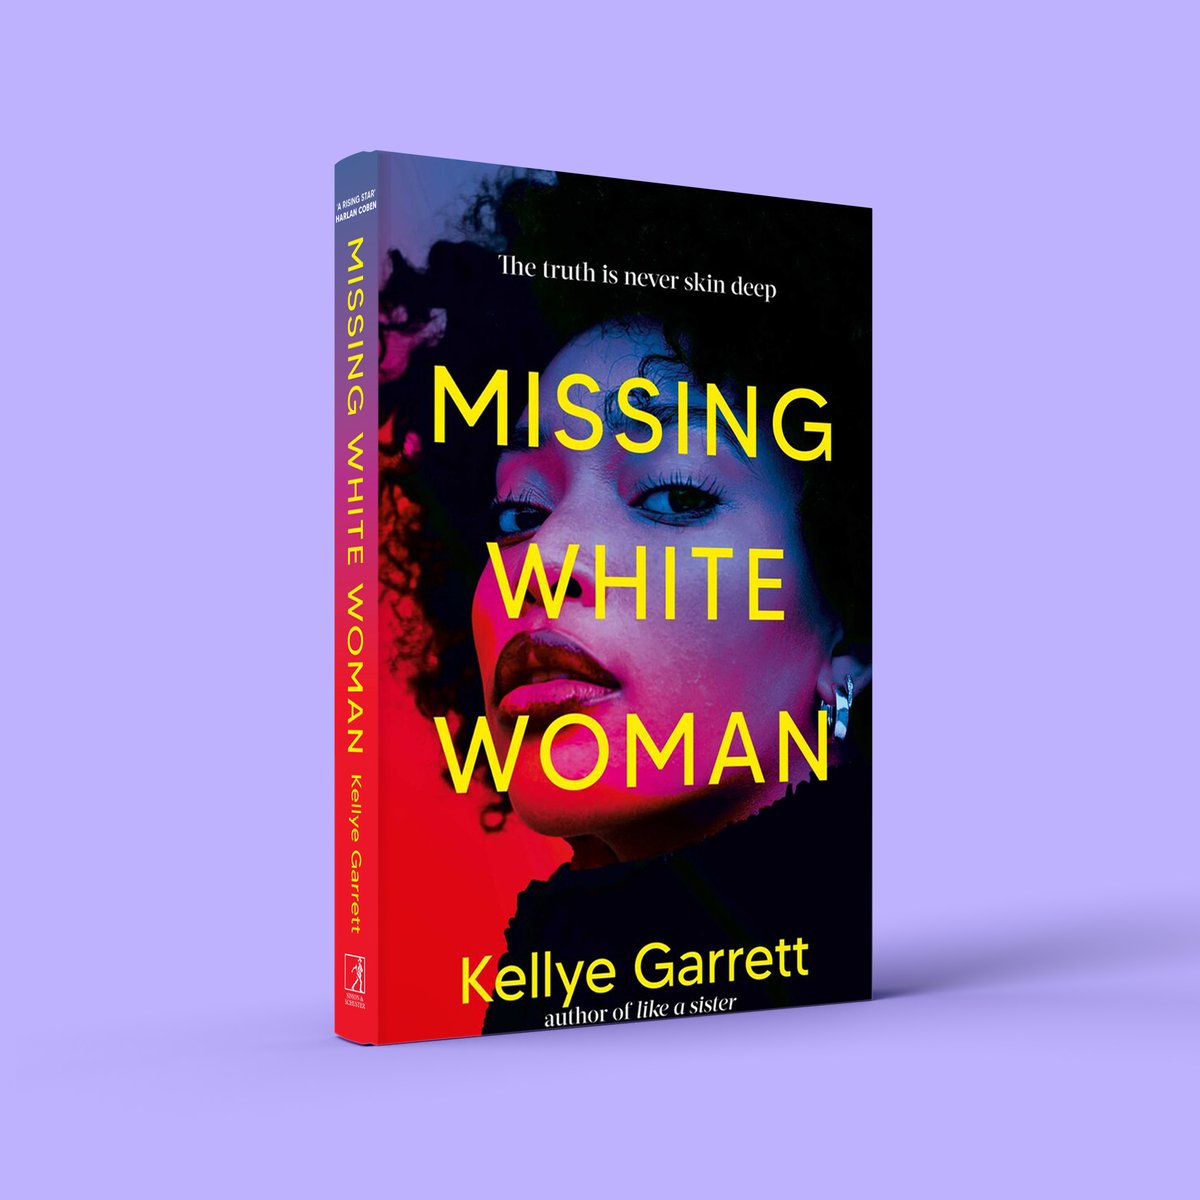 #MissingWhiteWoman is the razor-sharp new thriller from author of #LikeASister @kellyekell. Out 9 May and available for pre-order now. bit.ly/47sHkzJ